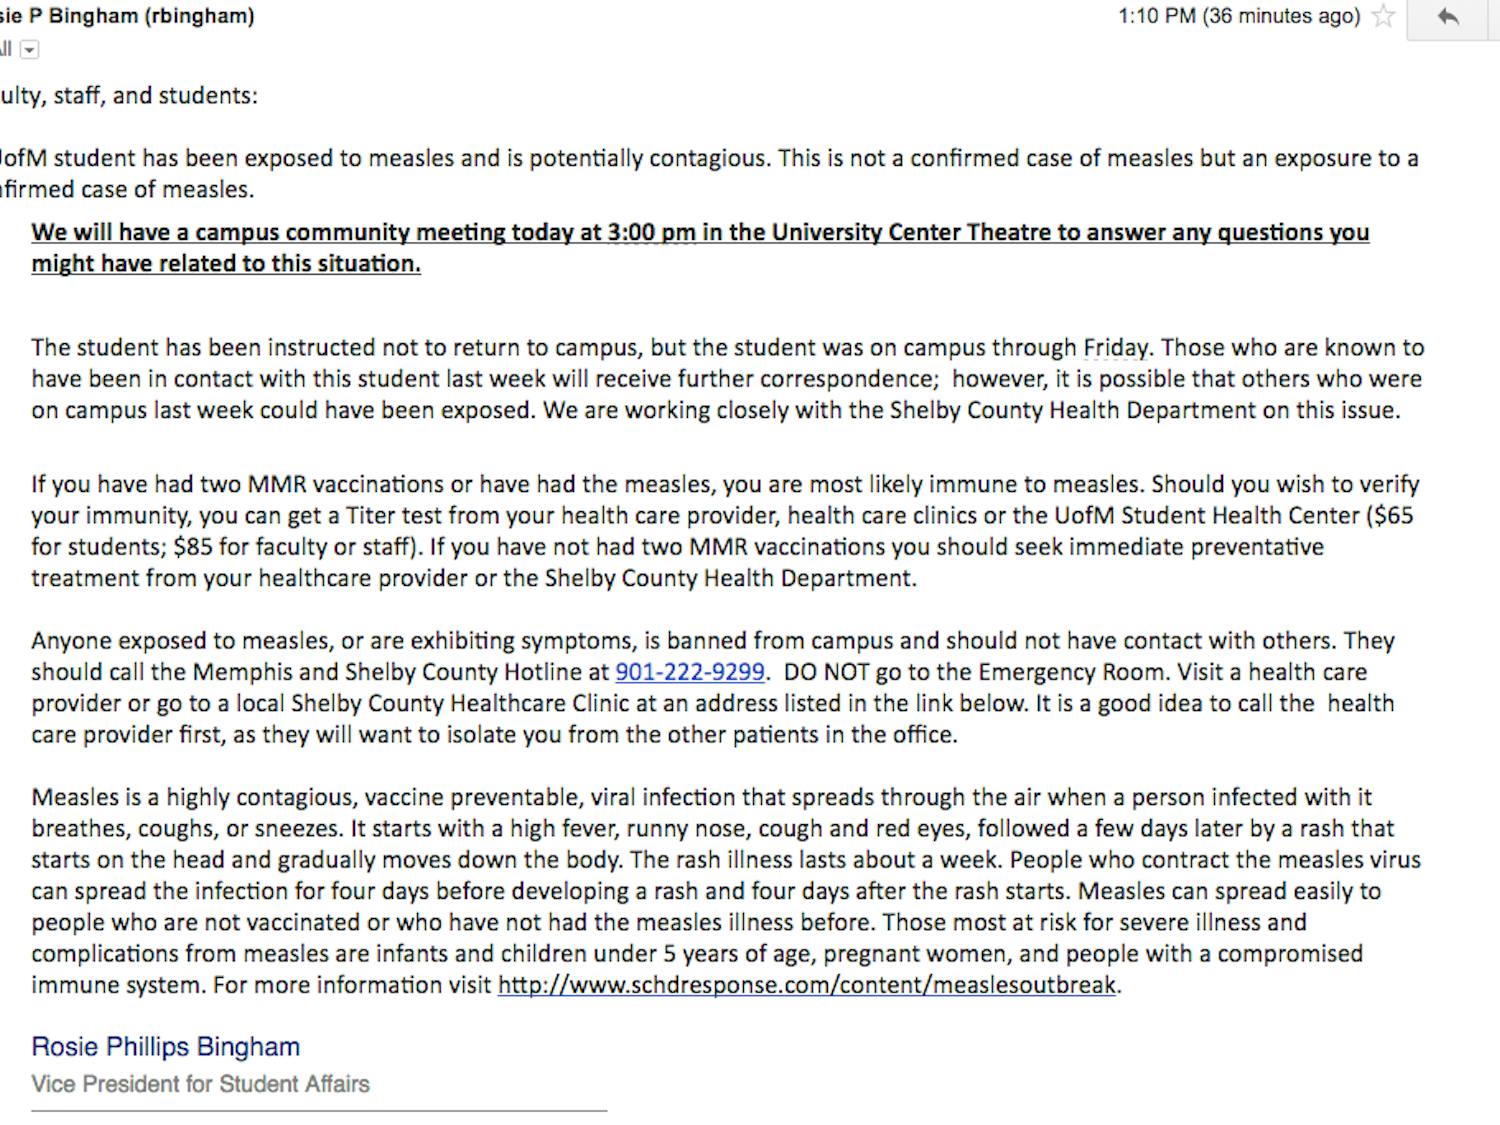 Rosie Bingham email about measles exposed student